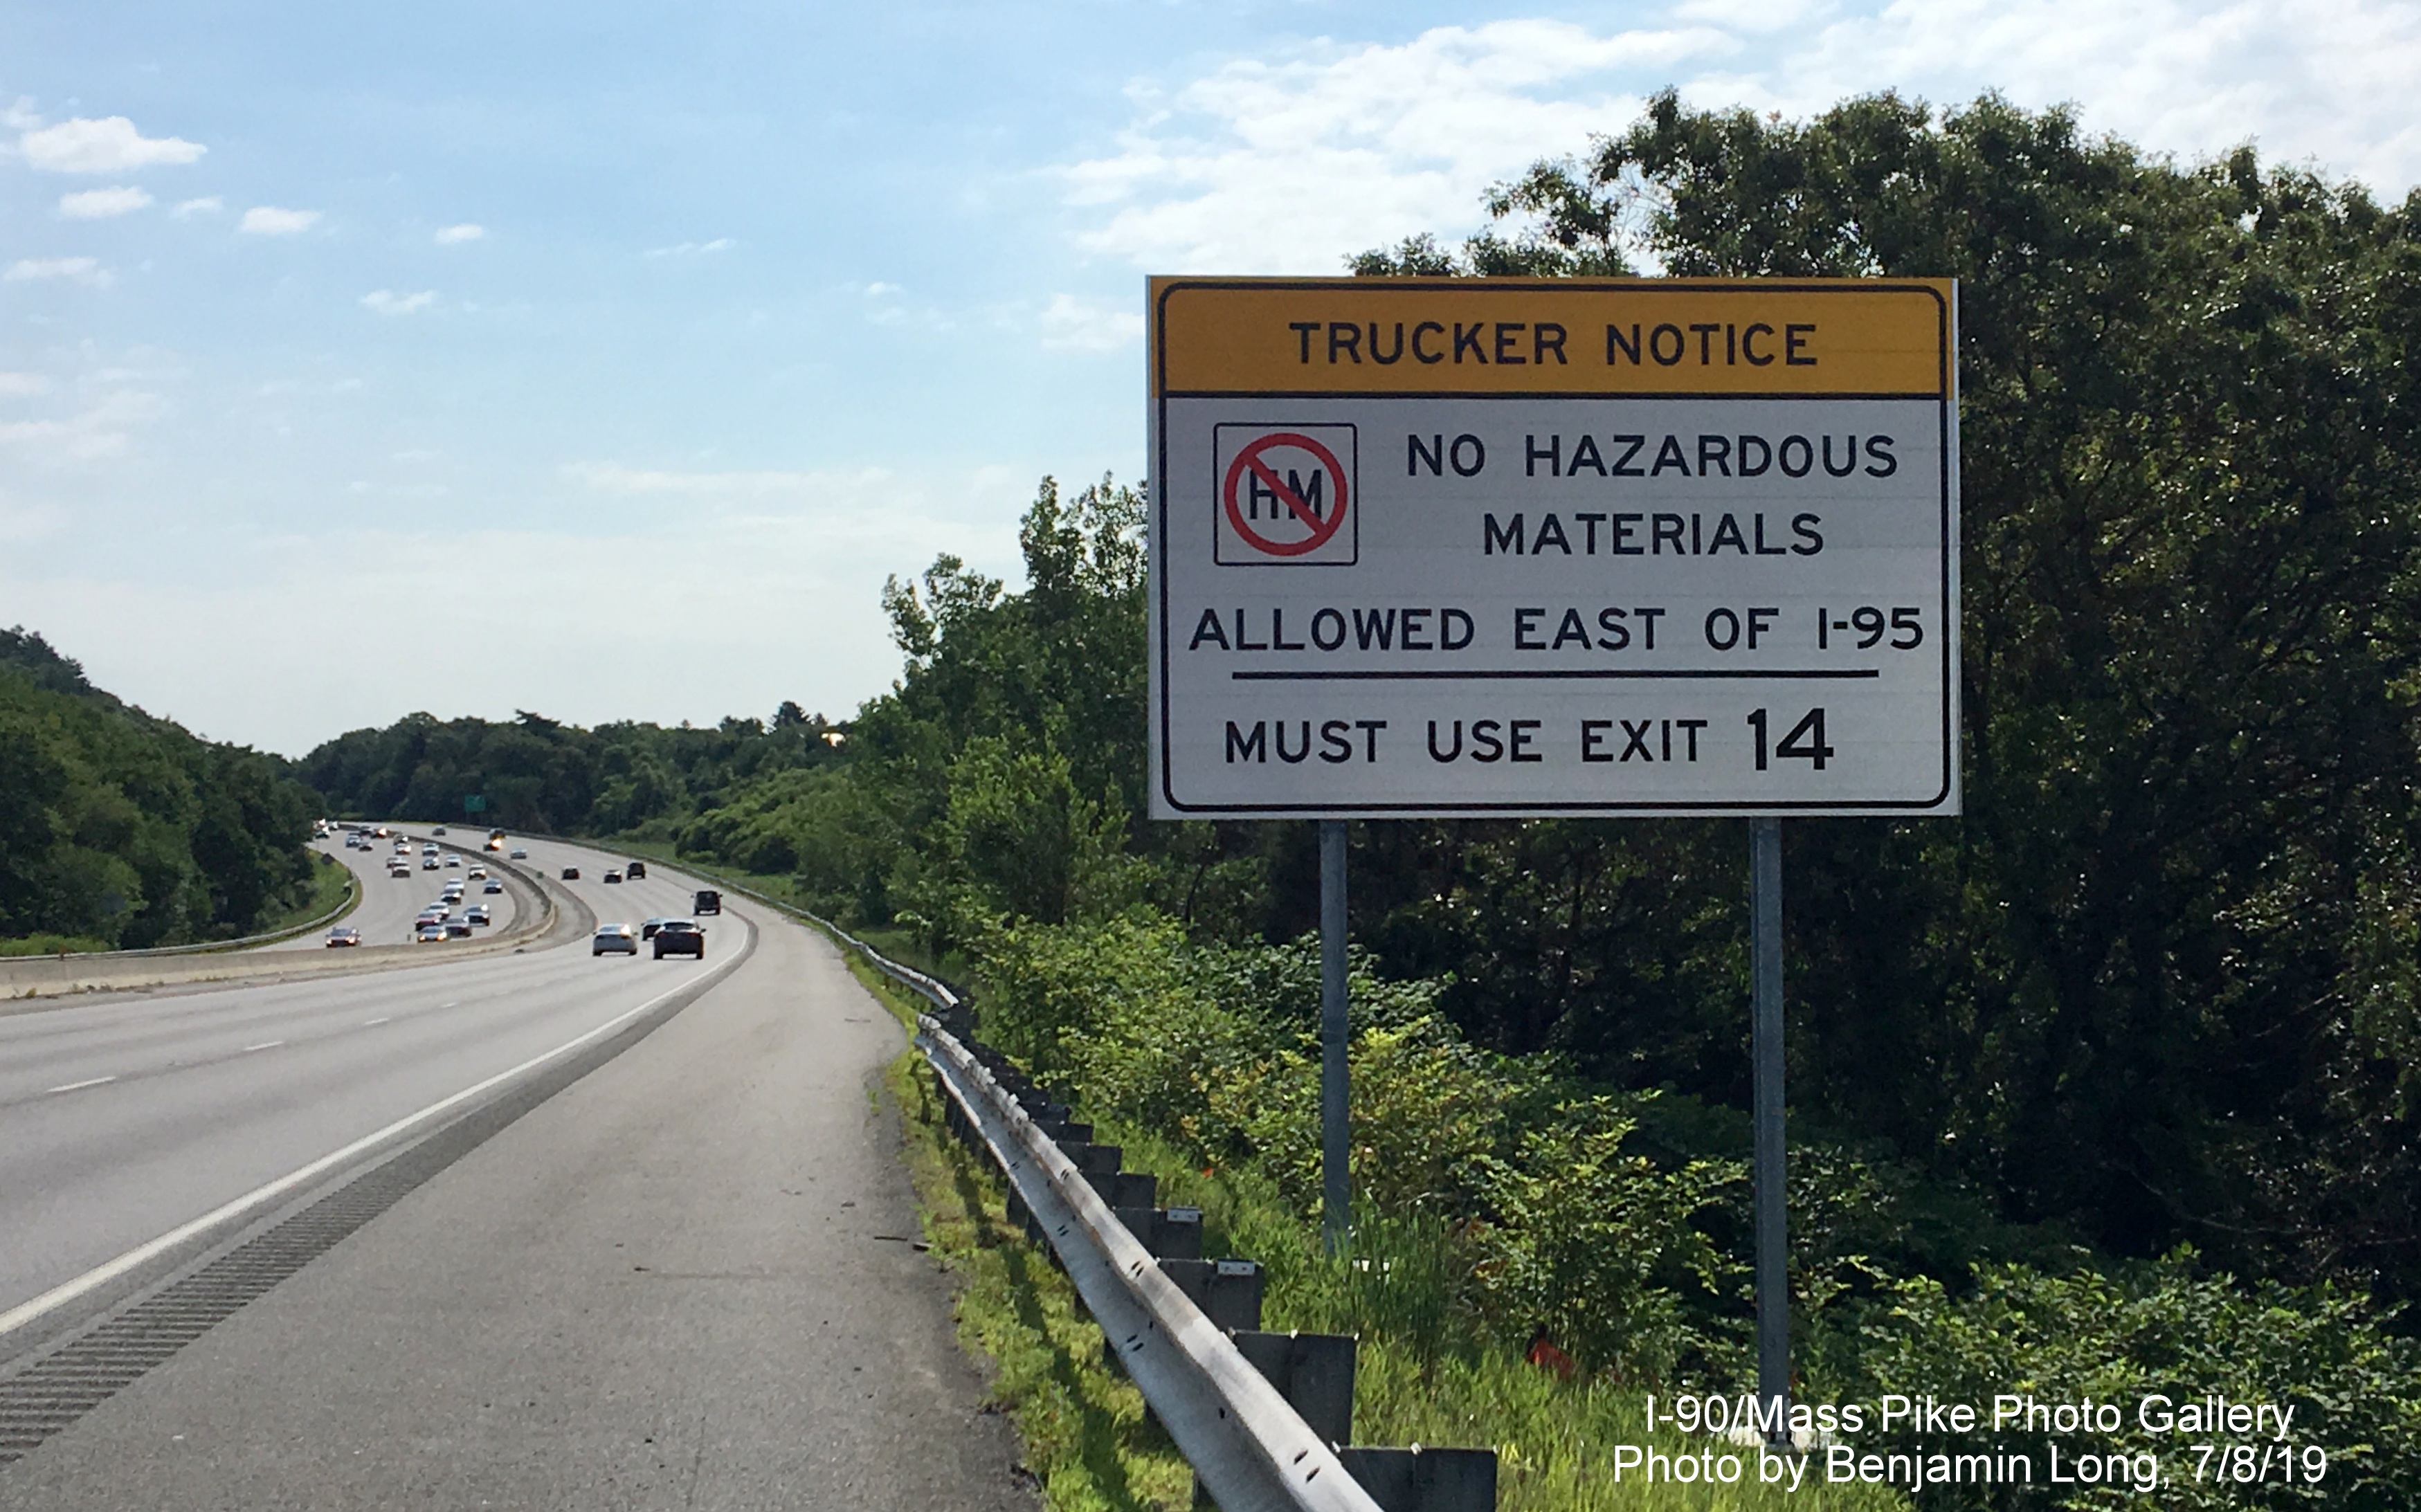 Image of recently placed trucker haz mat advisory sign on I-90/Mass Pike East in Weston with room for 3 digit milepost based number, by Benjamin Long